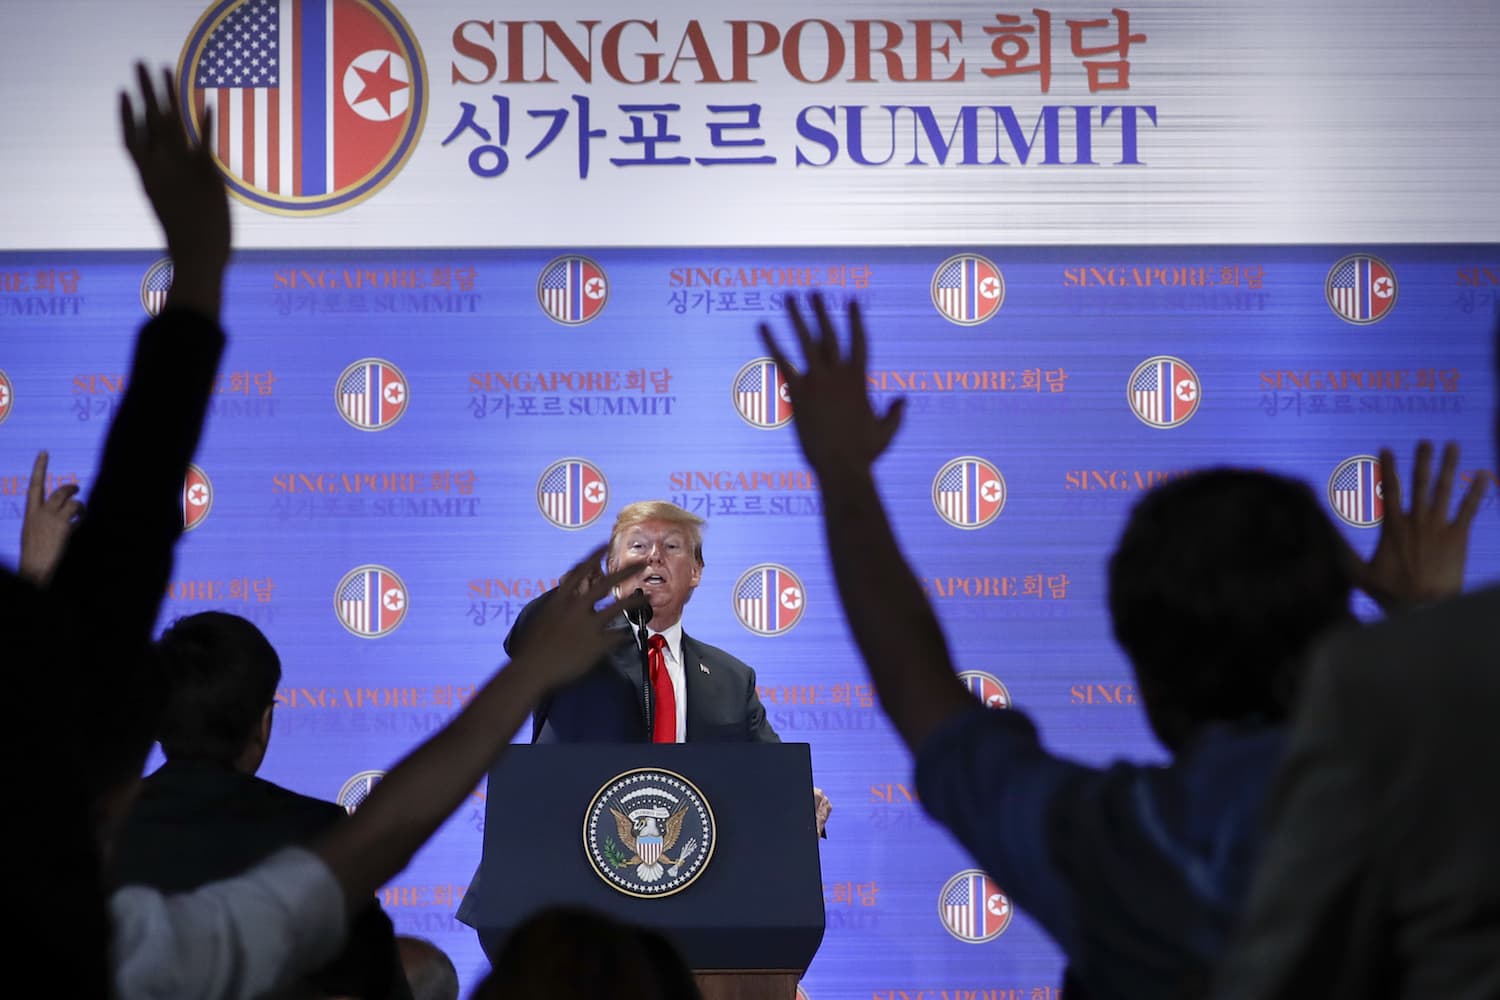 U.S. President Donald Trump answers questions about the summit with North Korea leader Kim Jong Un during a press conference at the Capella resort on Sentosa Island Tuesday, June 12, 2018 in Singapore. (Evan Vucci/AP)